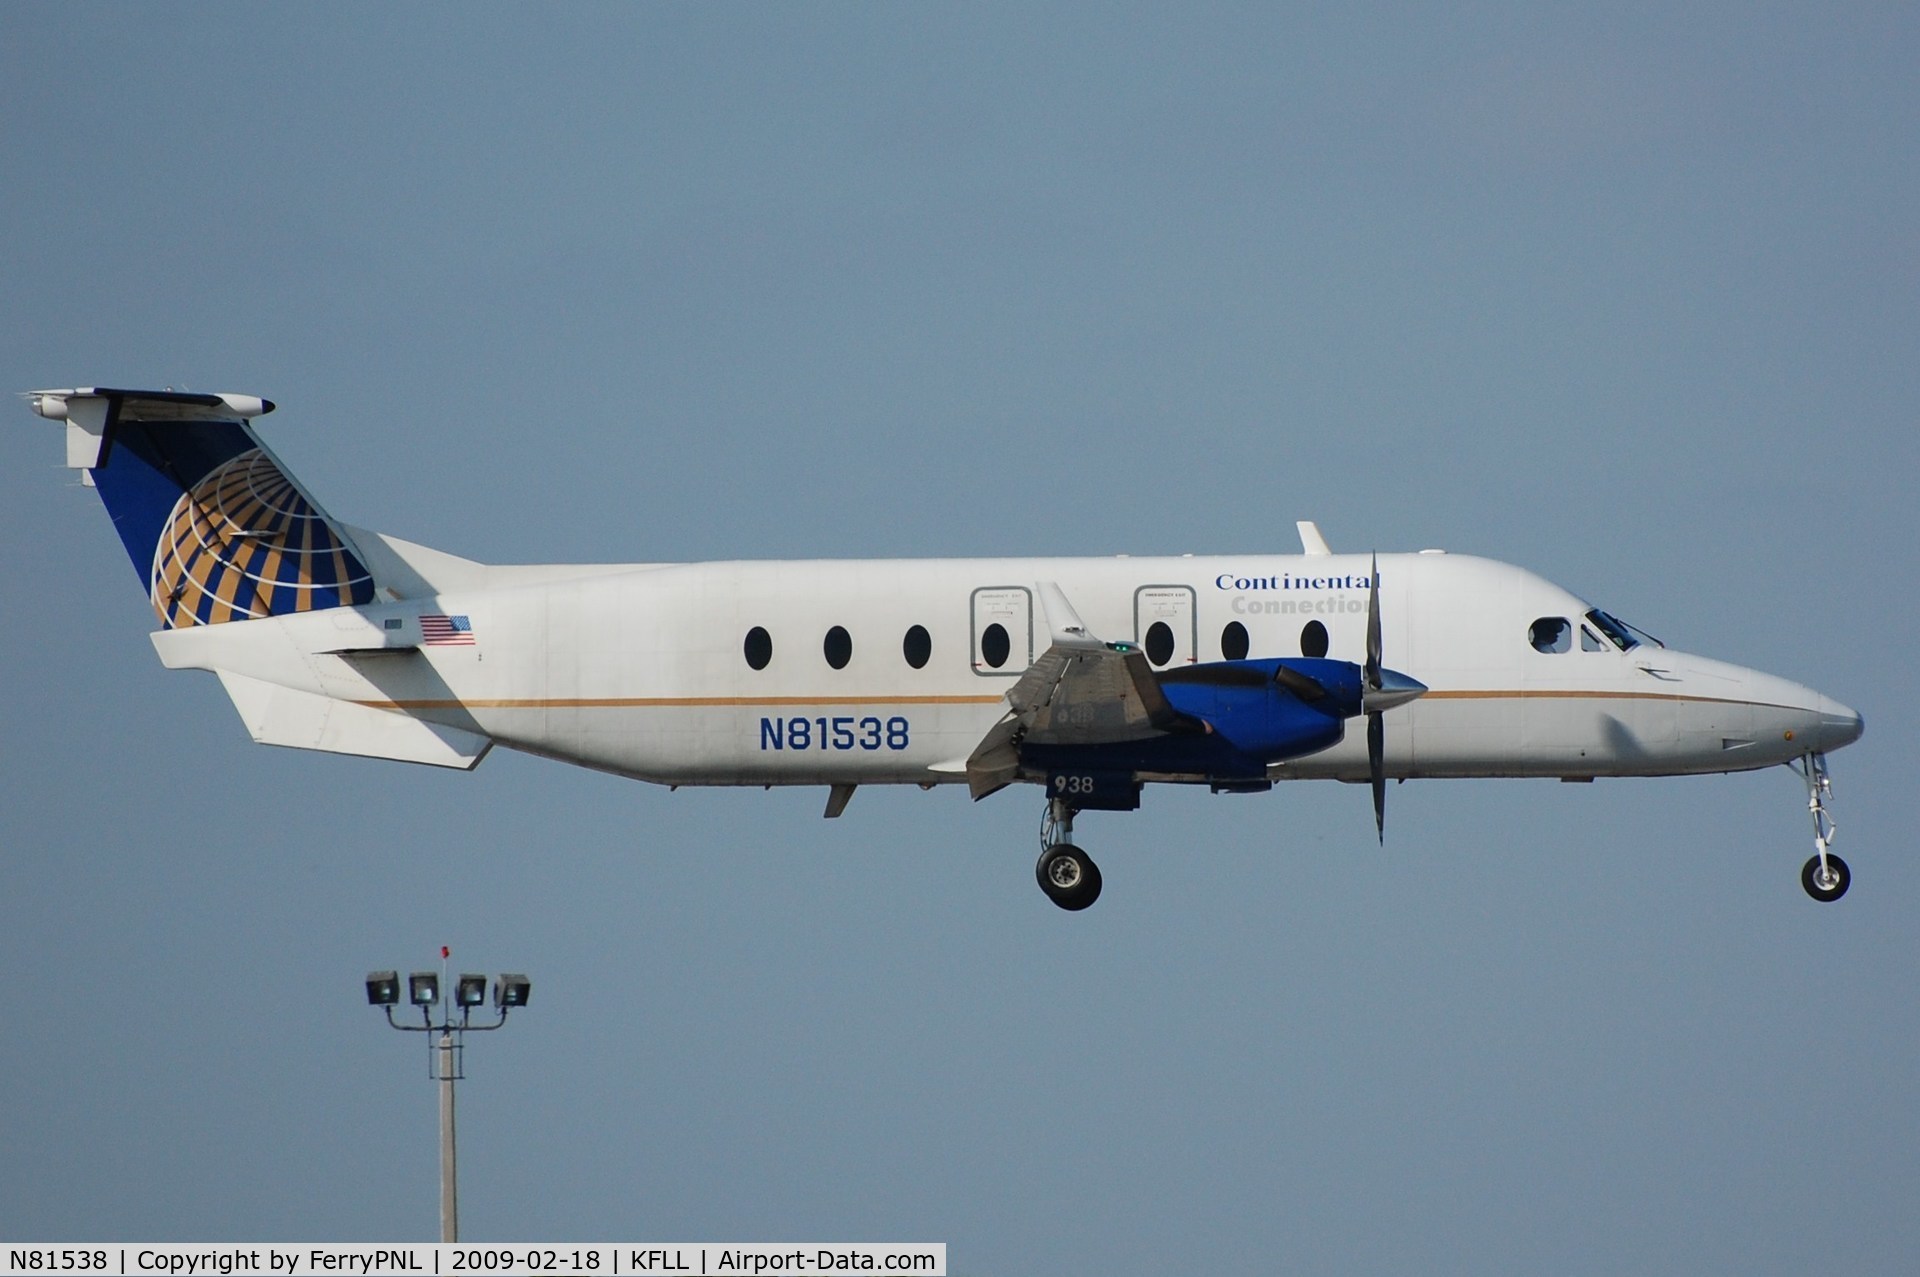 N81538, 1996 Beech 1900D C/N UE-199, Gulfstream operating Be1900D for CO Express